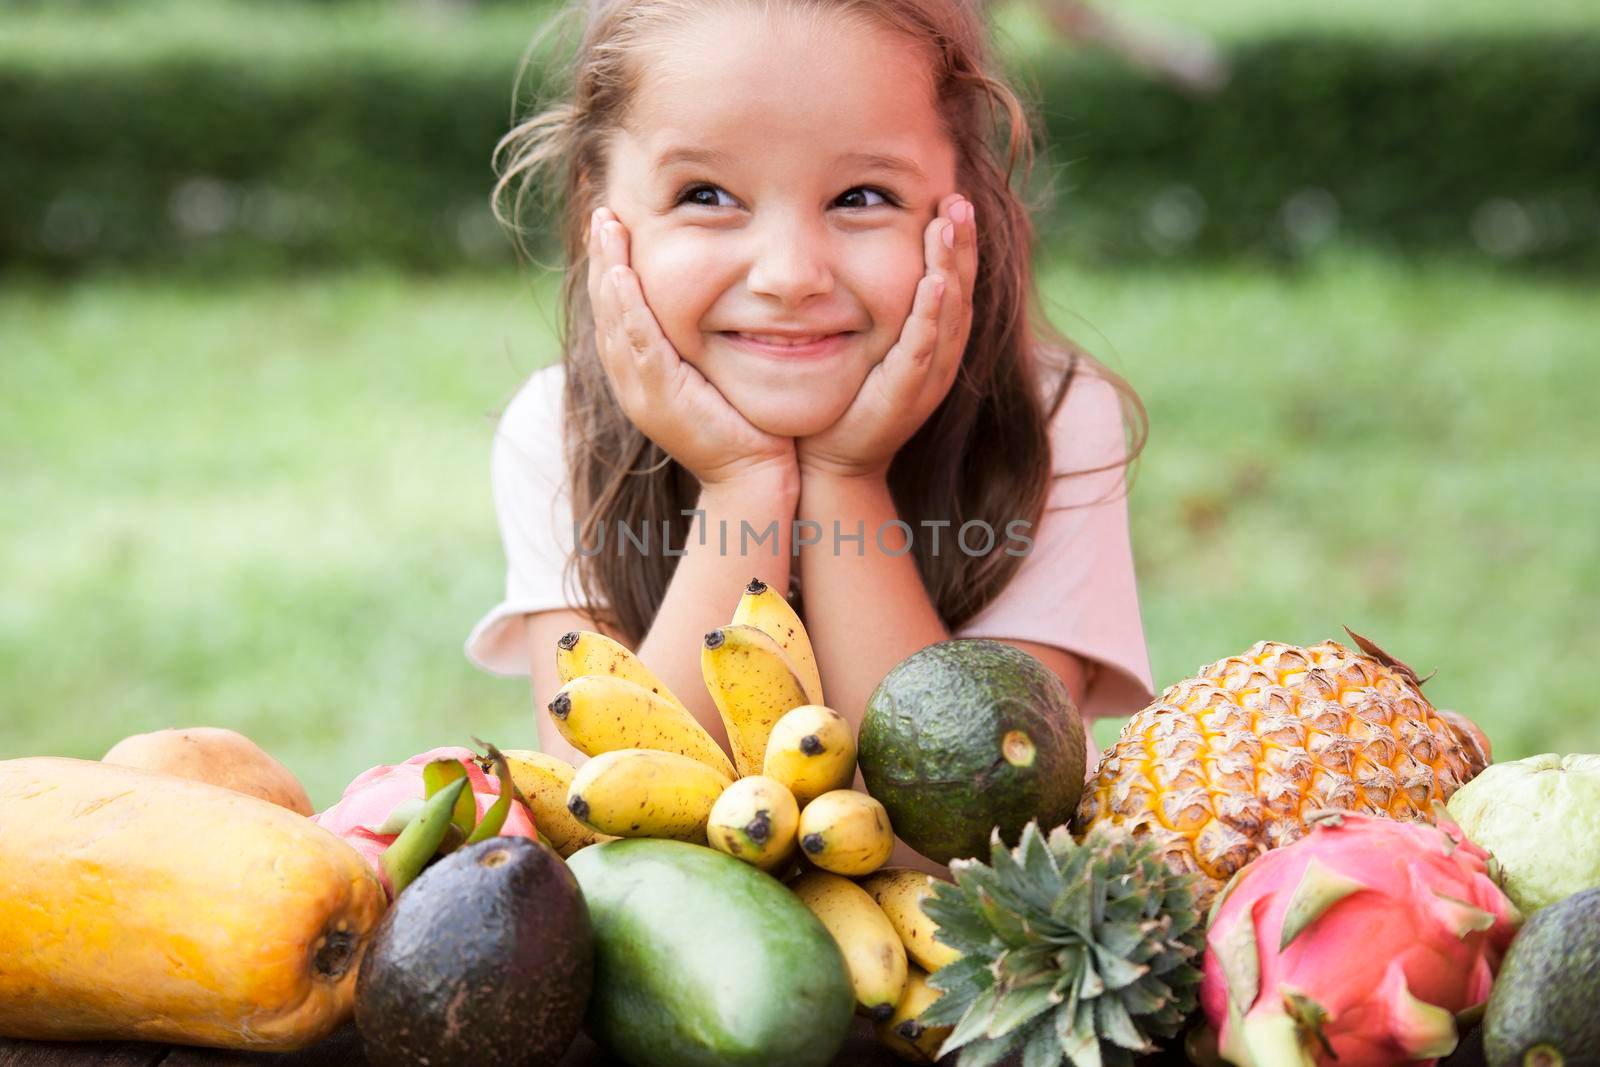 Exotic fruit on wooden table. Summer background with small Laughing happy girl